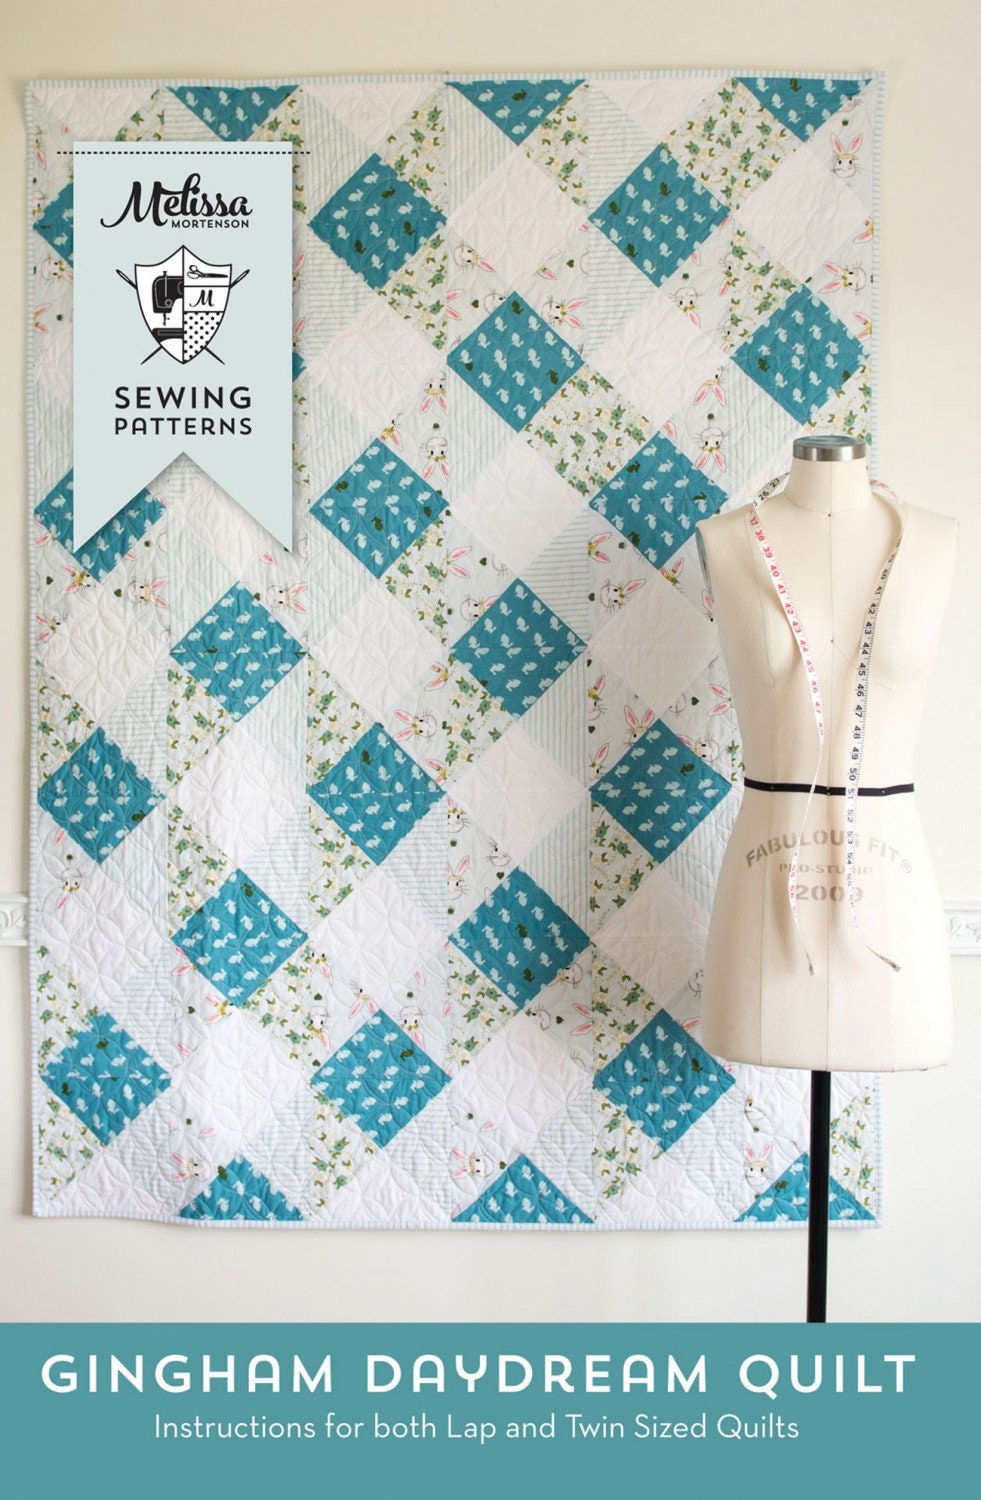 Gingham Daydream Quilt Pattern by Melissa Mortenson for The Polka Dot Chair (Physical Copy)